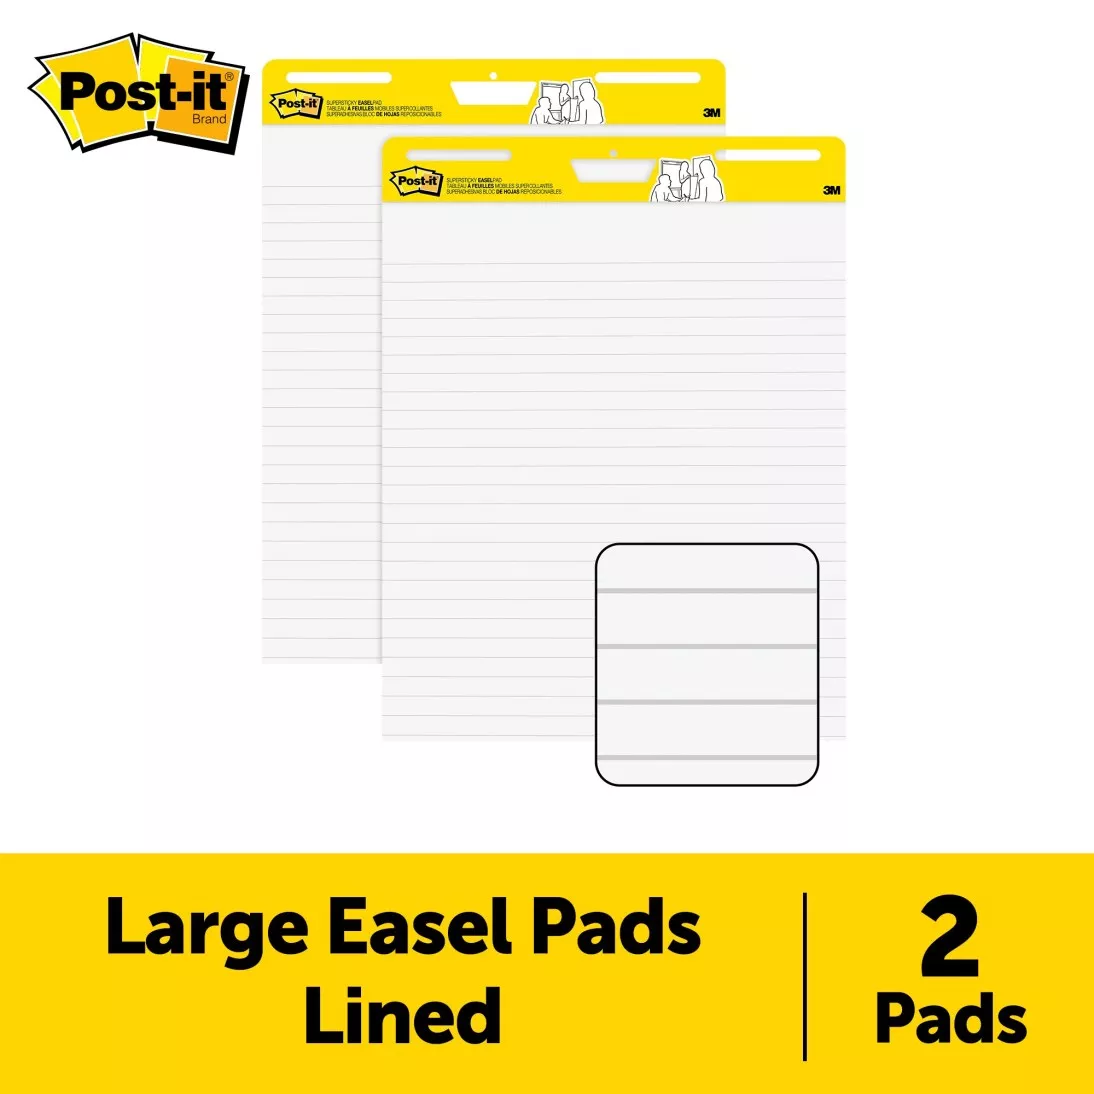 Post-it® Super Sticky Easel Pad Lined 561WL VAD 2PK, 25 in x 30 in (63.5 cm x 76.2 cm), 30 Sheets-Pad, 2 Pads